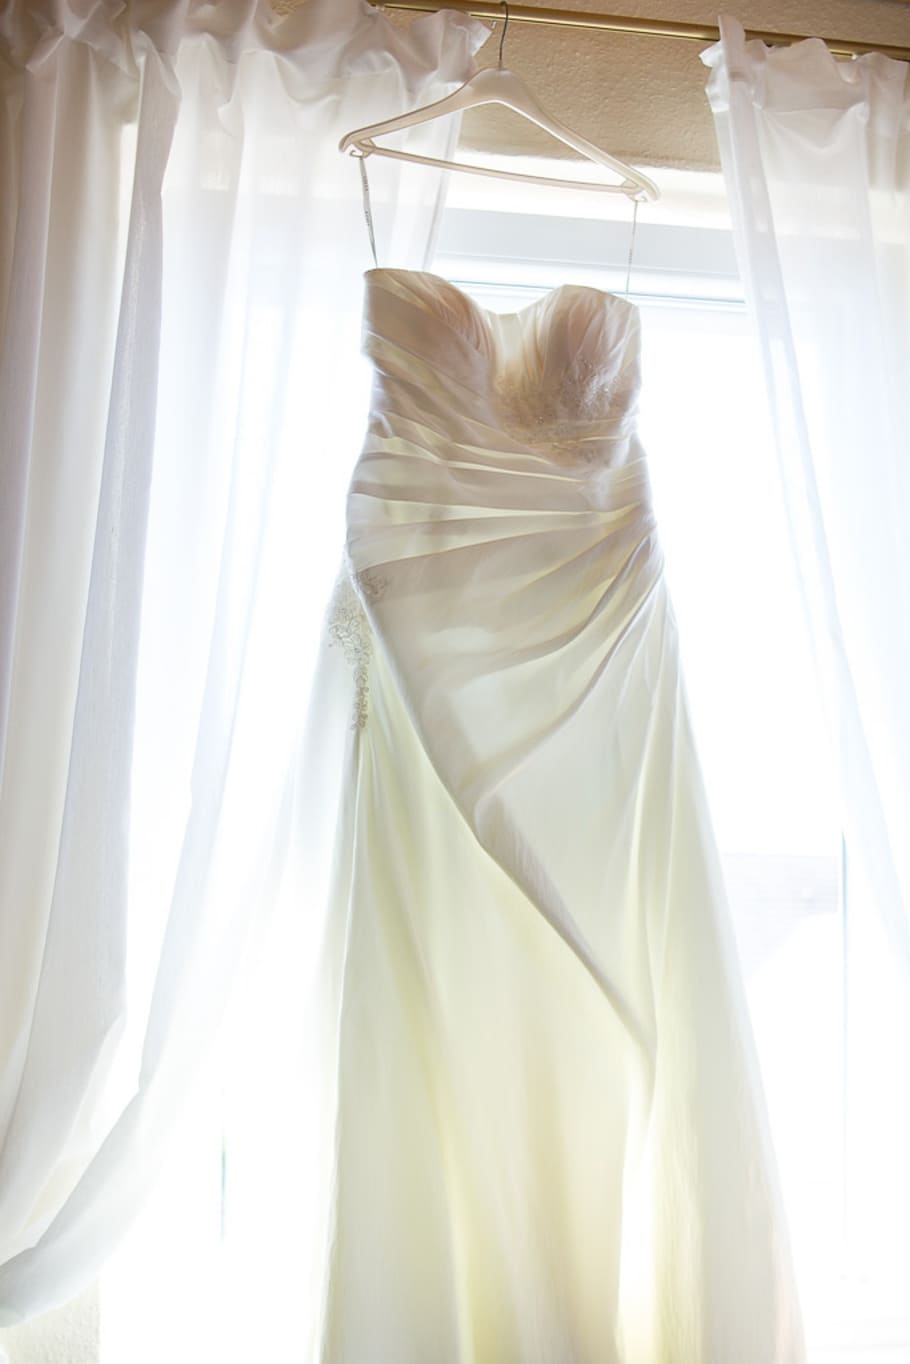 white drape tube wedding gown hang on clothes hanger against window curtains, HD wallpaper